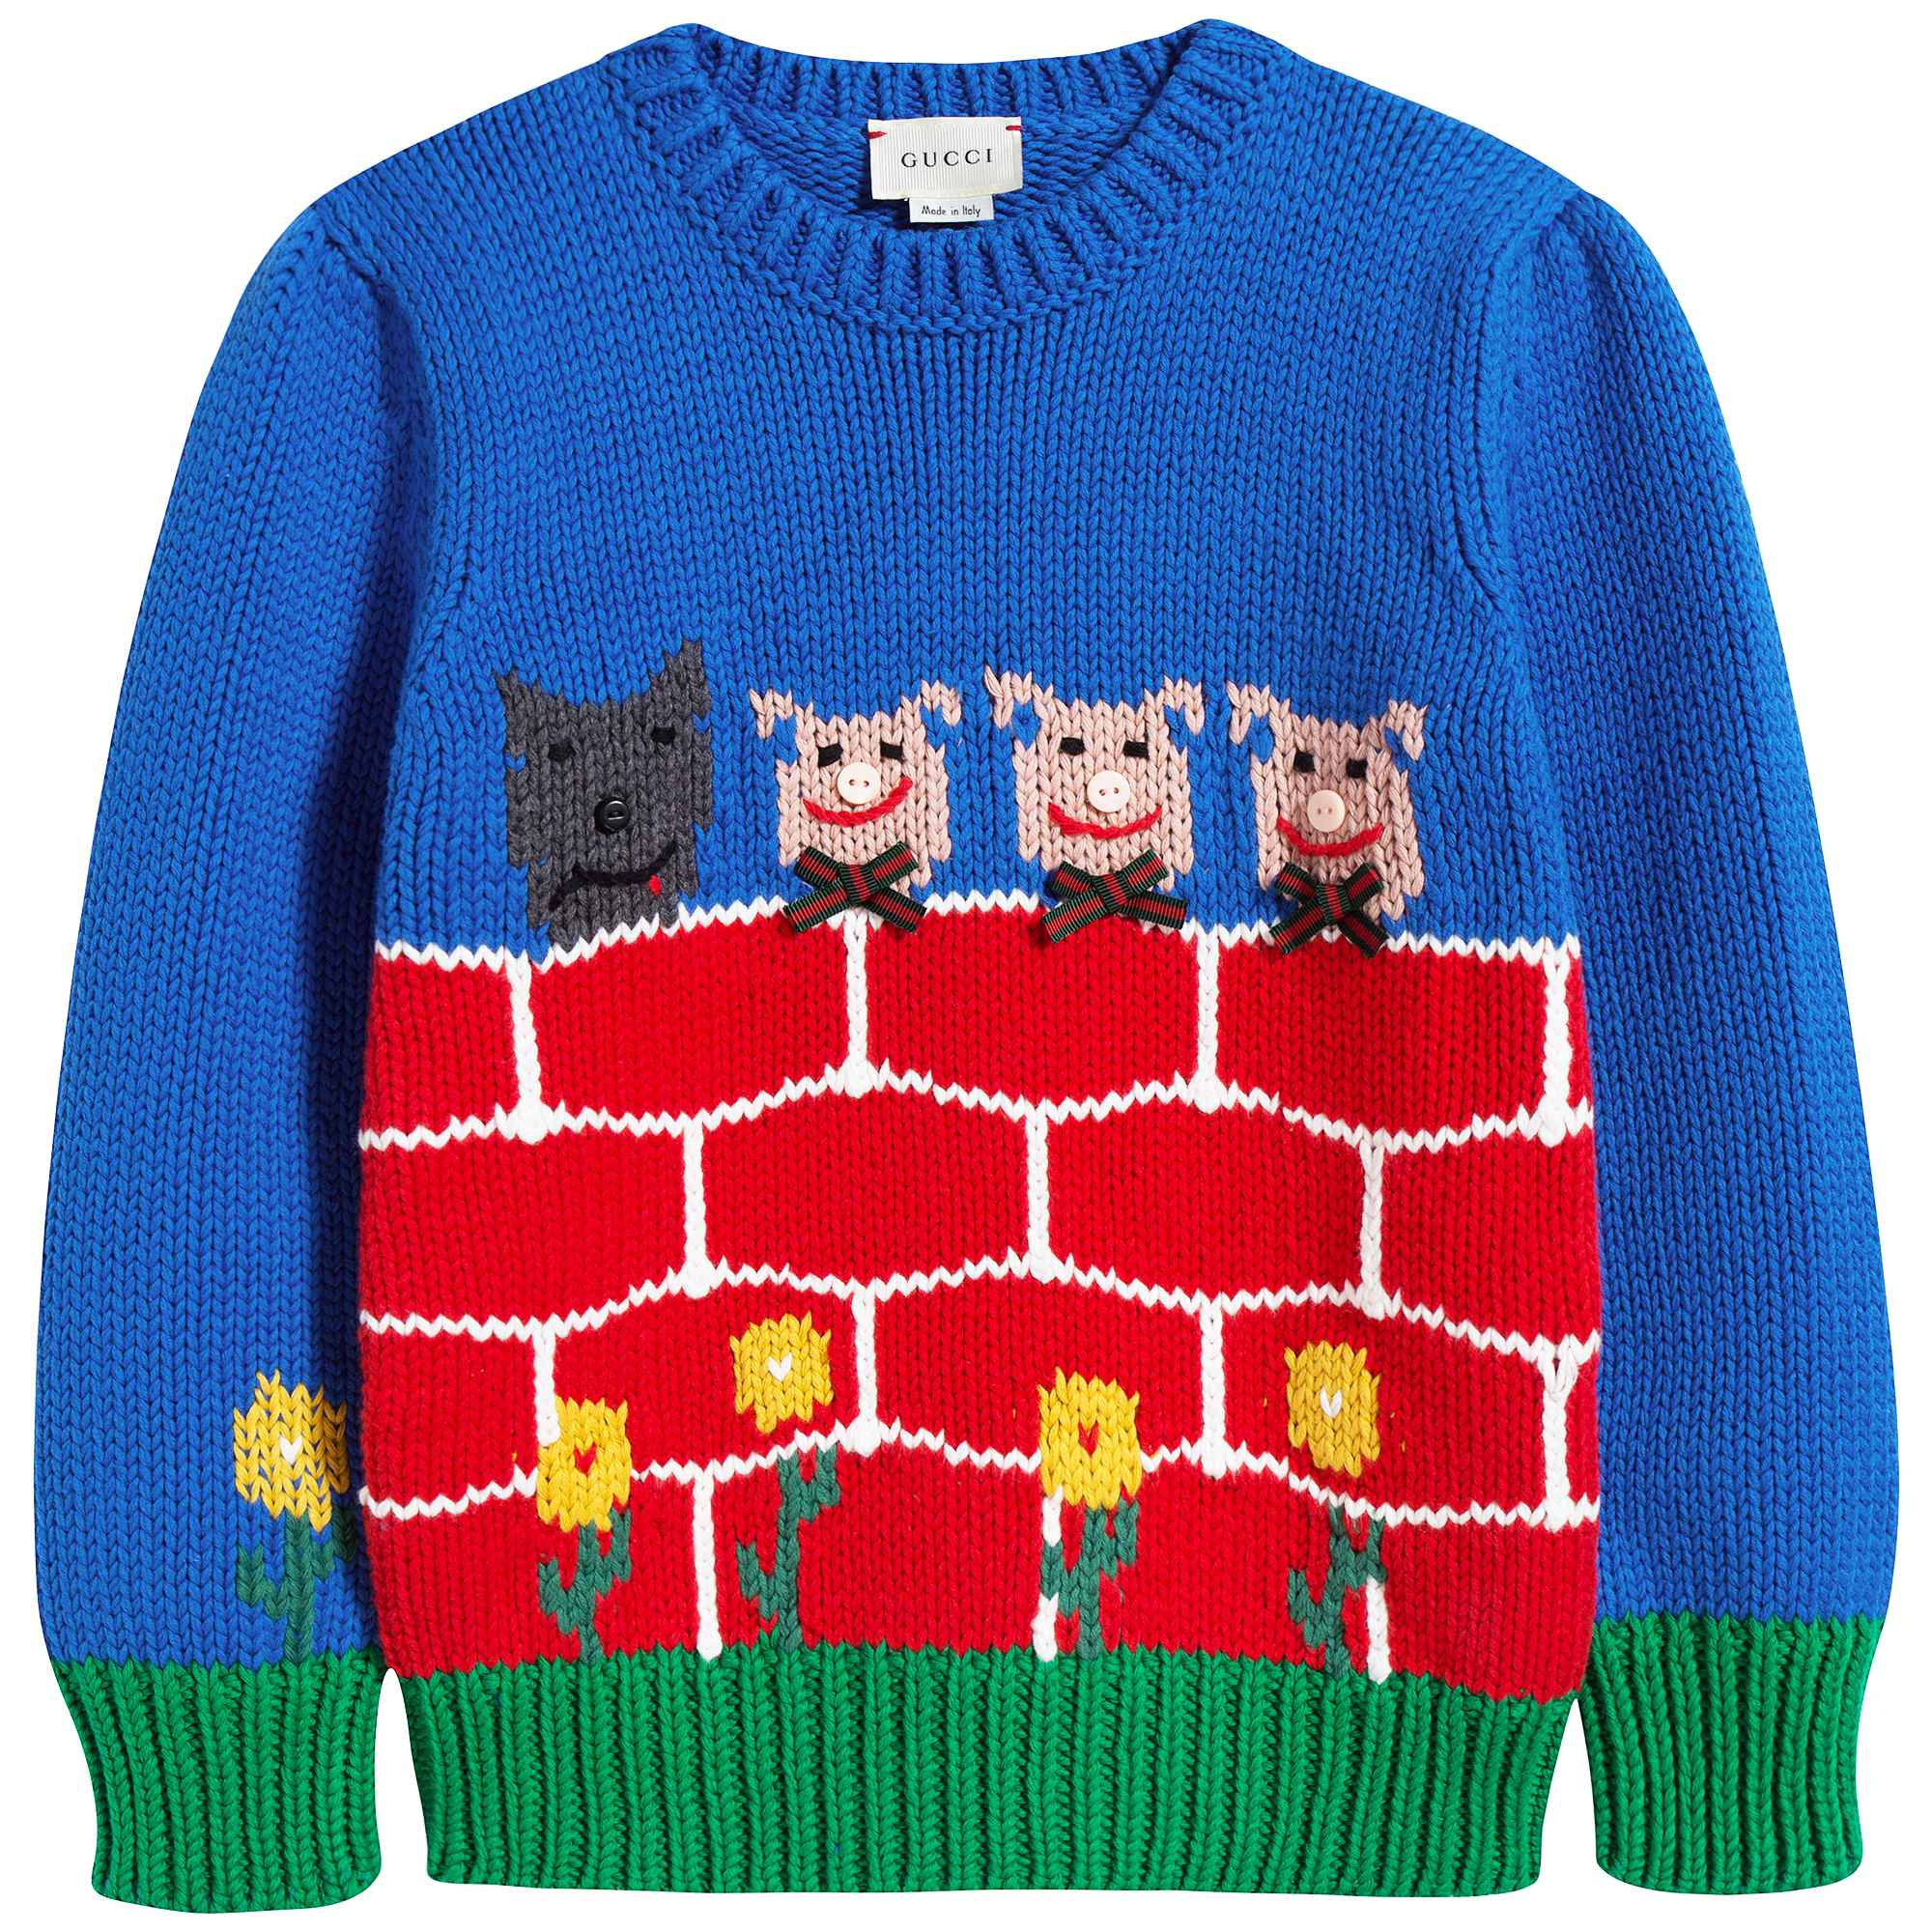 Boys Blue & Red Sweater